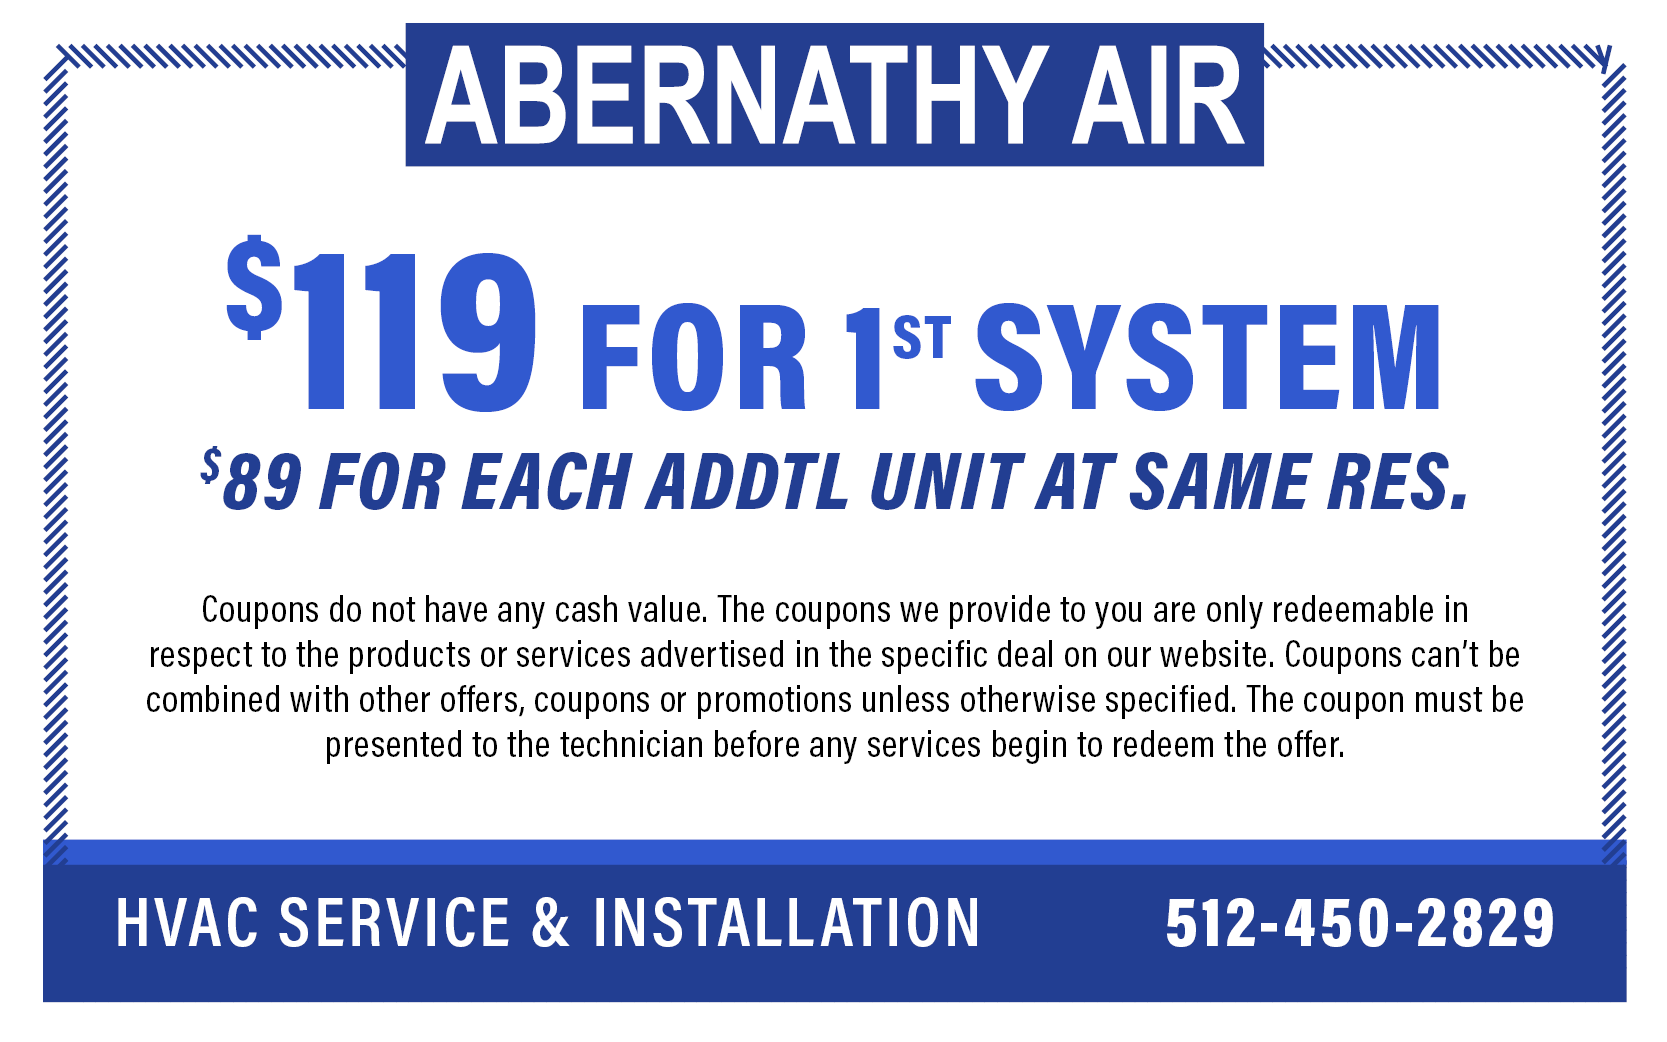 Abernathy Air - Maxwell AC and Heating Coupons - $119 for 1st System, $89 for Each Additional Unit at Same Residence